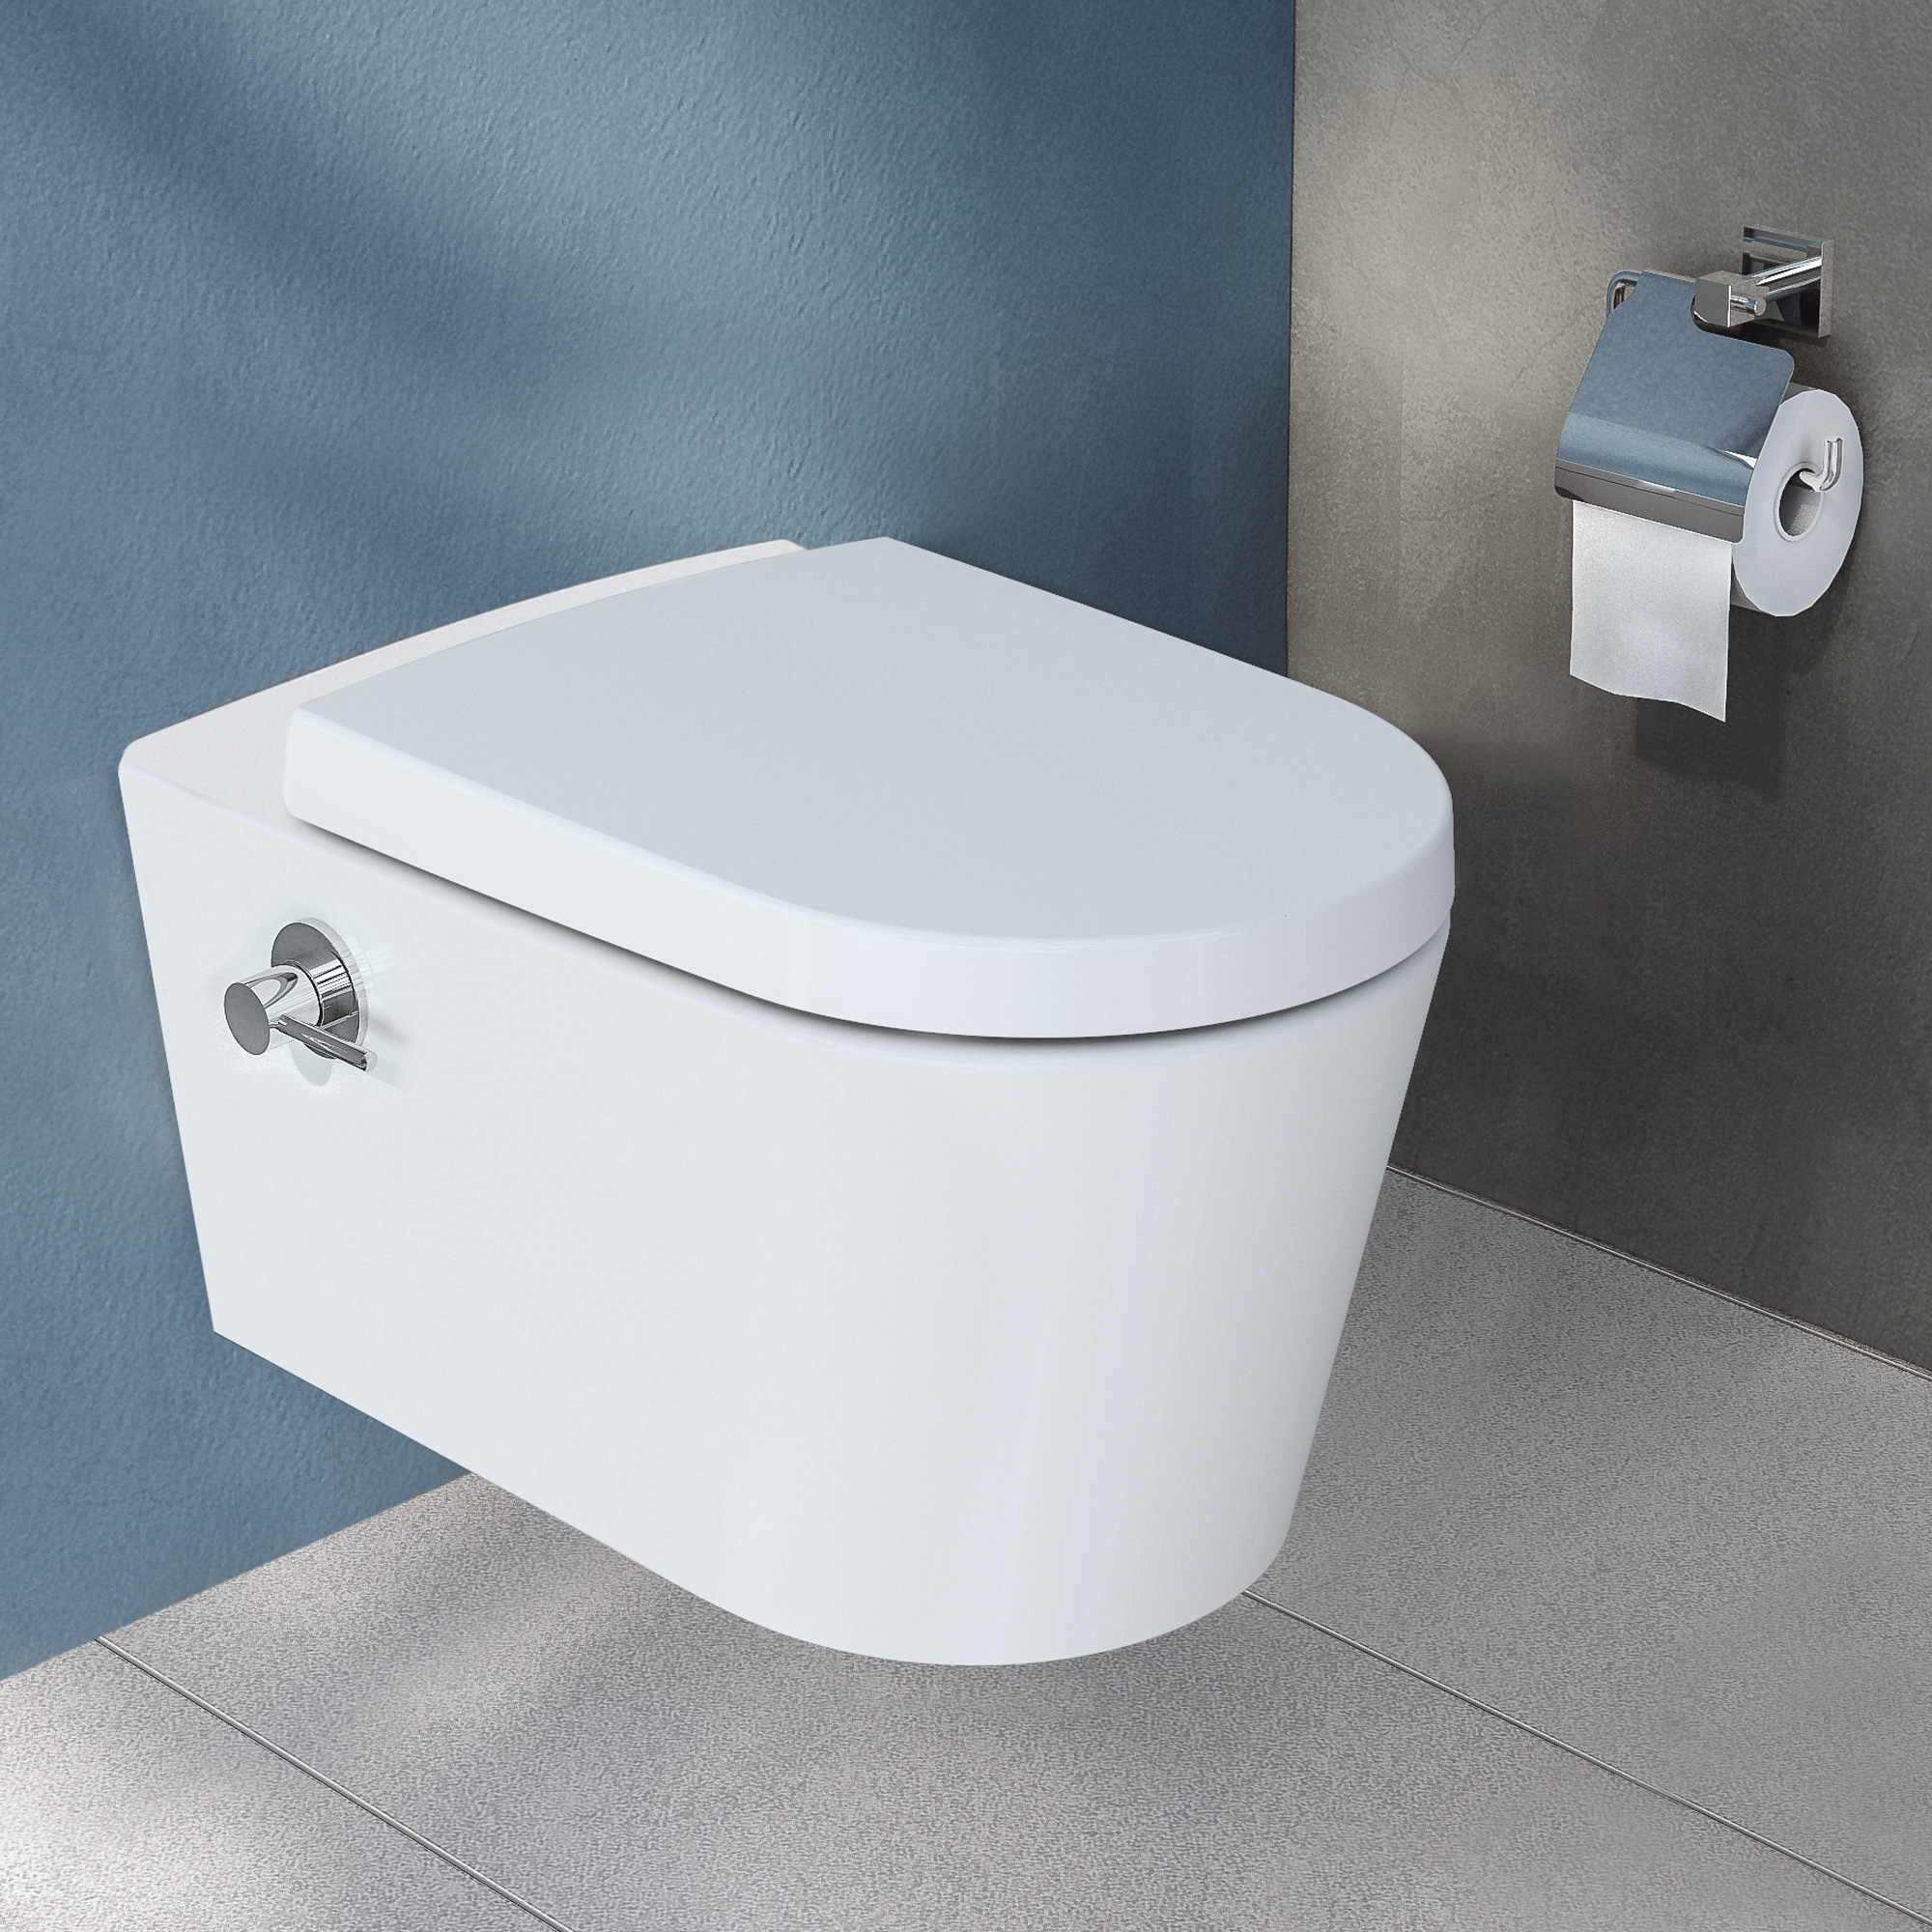 afskaffet blotte klap VitrA Options Nest wall-mounted washdown toilet with bidet function  rimless, white, with VitrAclean, with integrated fitting - 5176B403-1684 |  REUTER